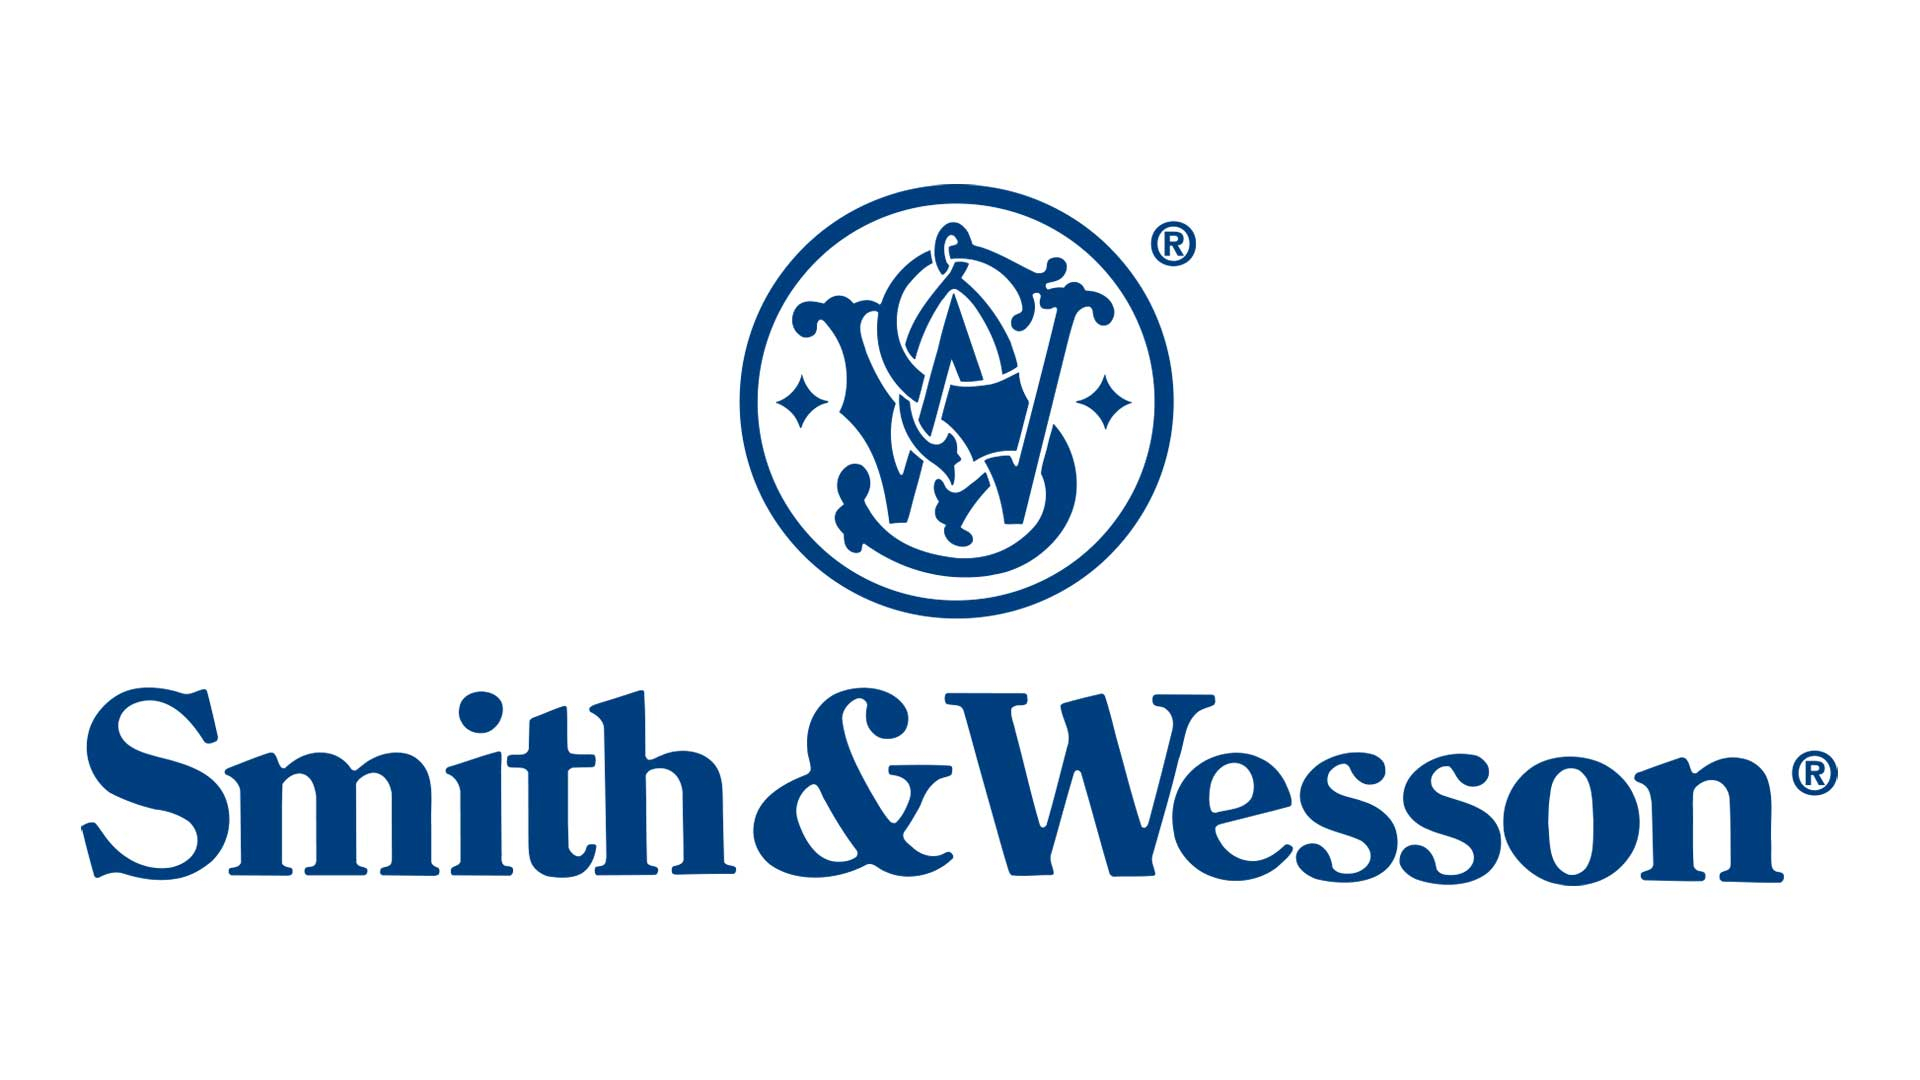 1920x1080 Smith \u0026 Wesson CEO Issues Strong Statement In The Face Of 2nd Amendment Attacks | An Official Journal Of The NRA